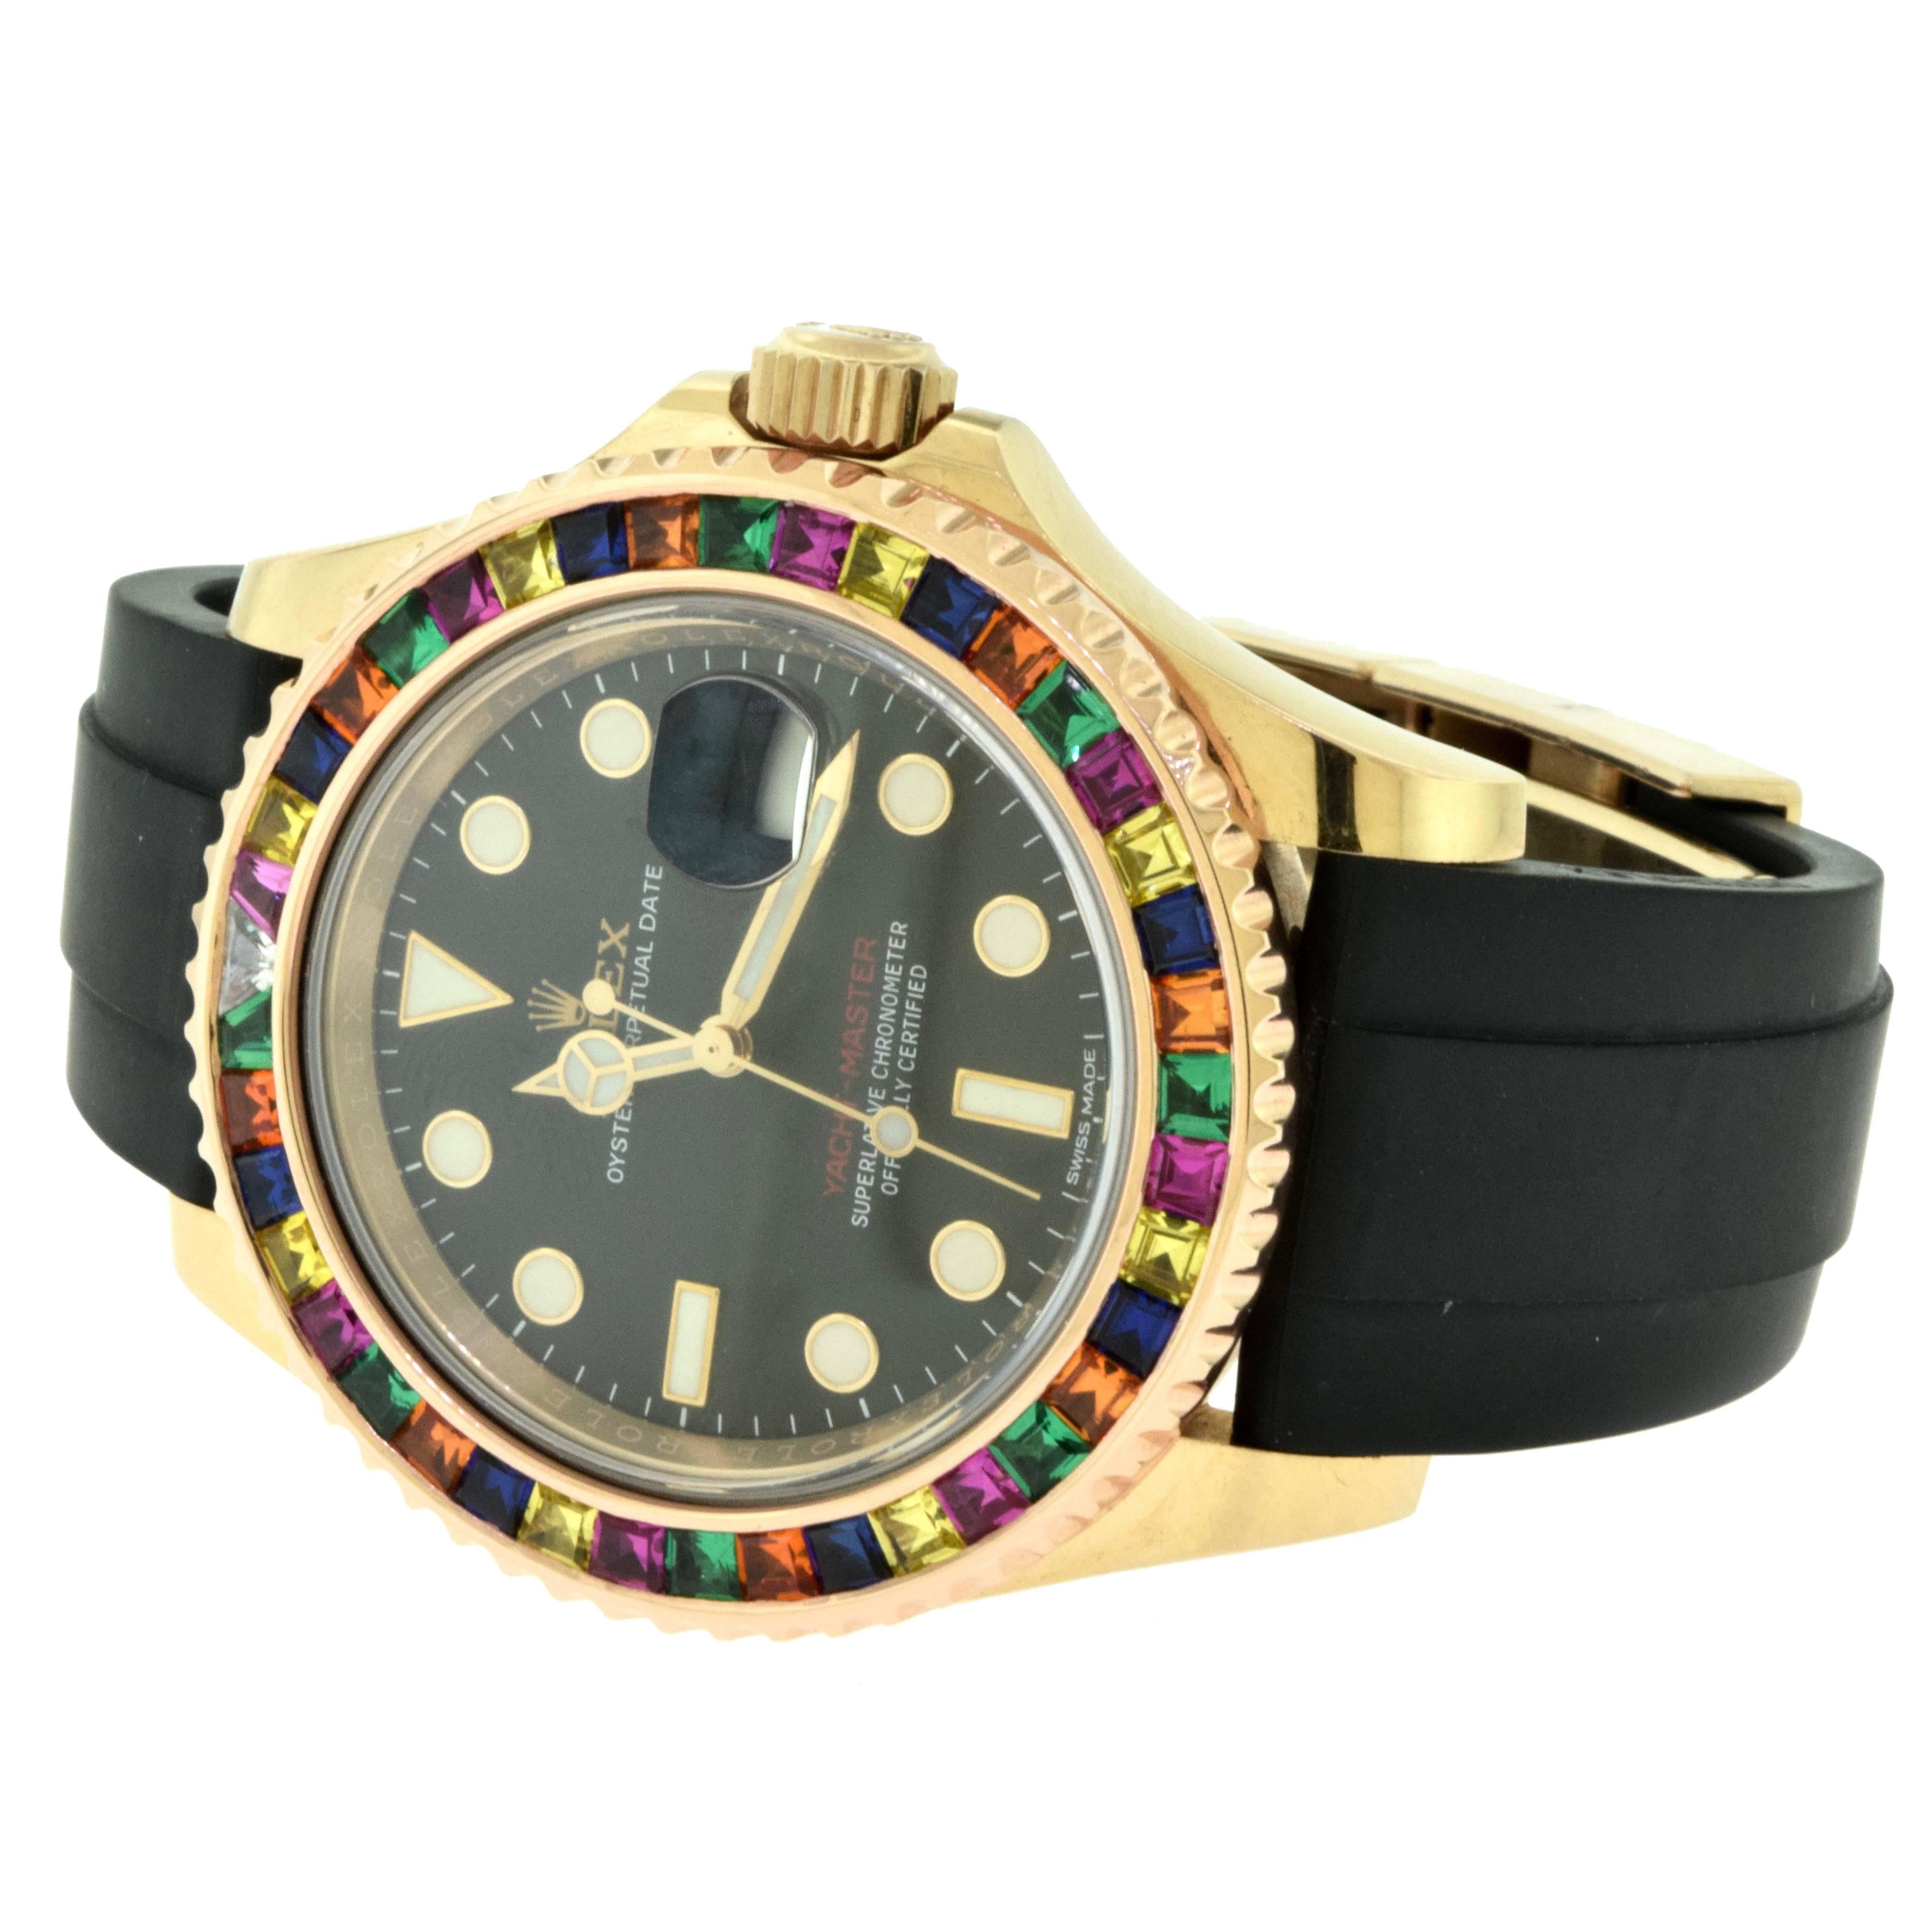 Brand: Rolex
Reference: 11665
Caliber: 3135
Movement: Perpetual, Mechanical, Self-Winding
Case Size: 40 mm
Stones: Multi Colored Sapphires (aftermarket)
Bracelet: Oysterflex
Model Case: Oyster, Everose Gold
Oyster Architecture: Monobloc case,